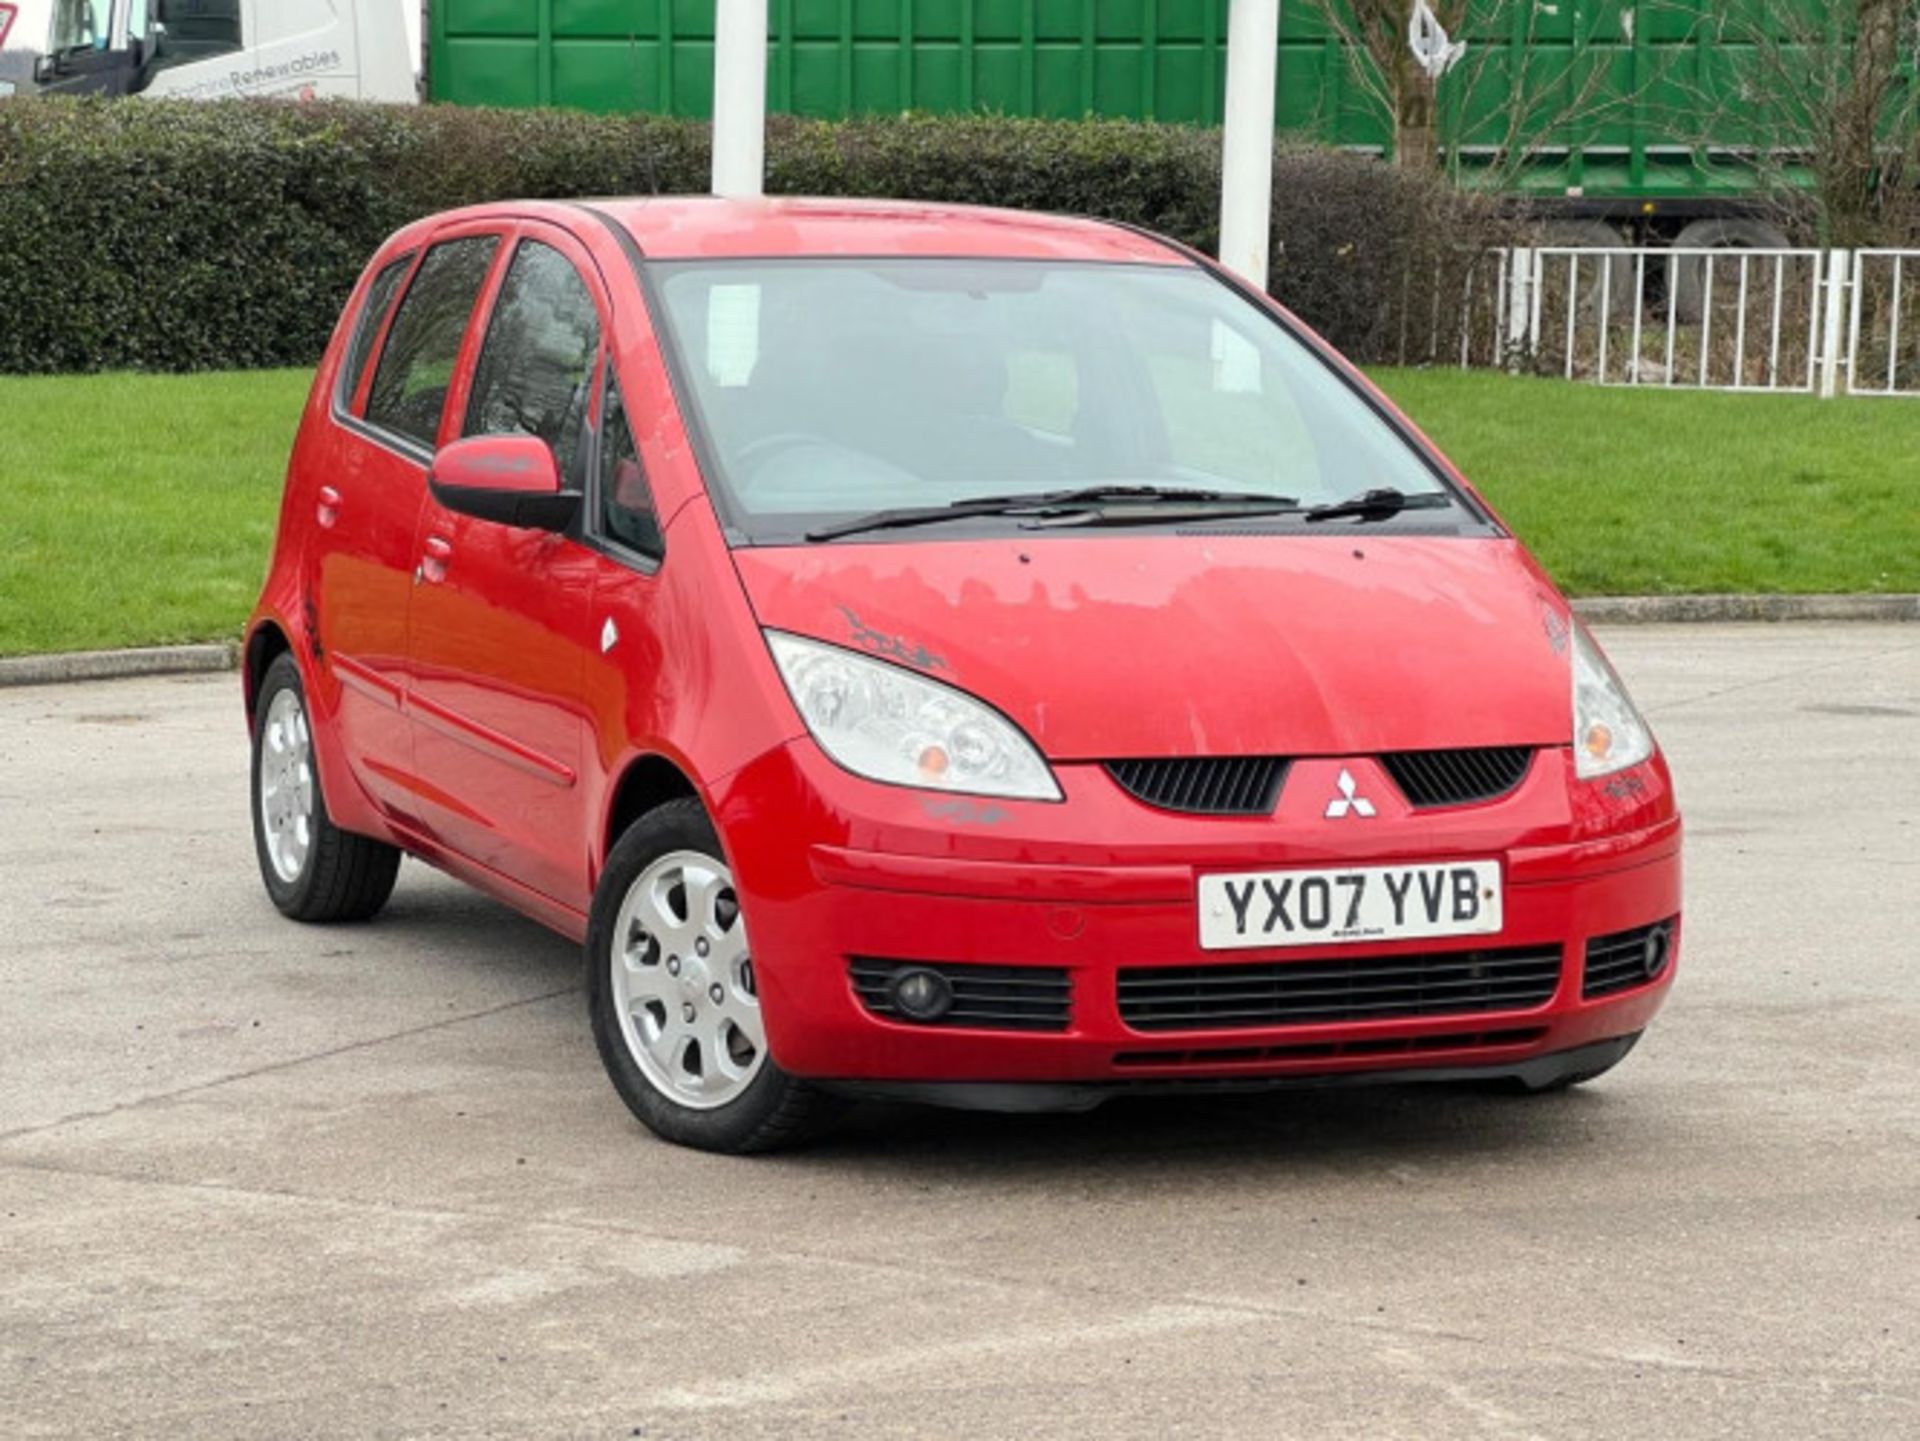 2007 MITSUBISHI COLT 1.5 DI-D DIESEL AUTOMATIC >>--NO VAT ON HAMMER--<< - Image 178 of 191